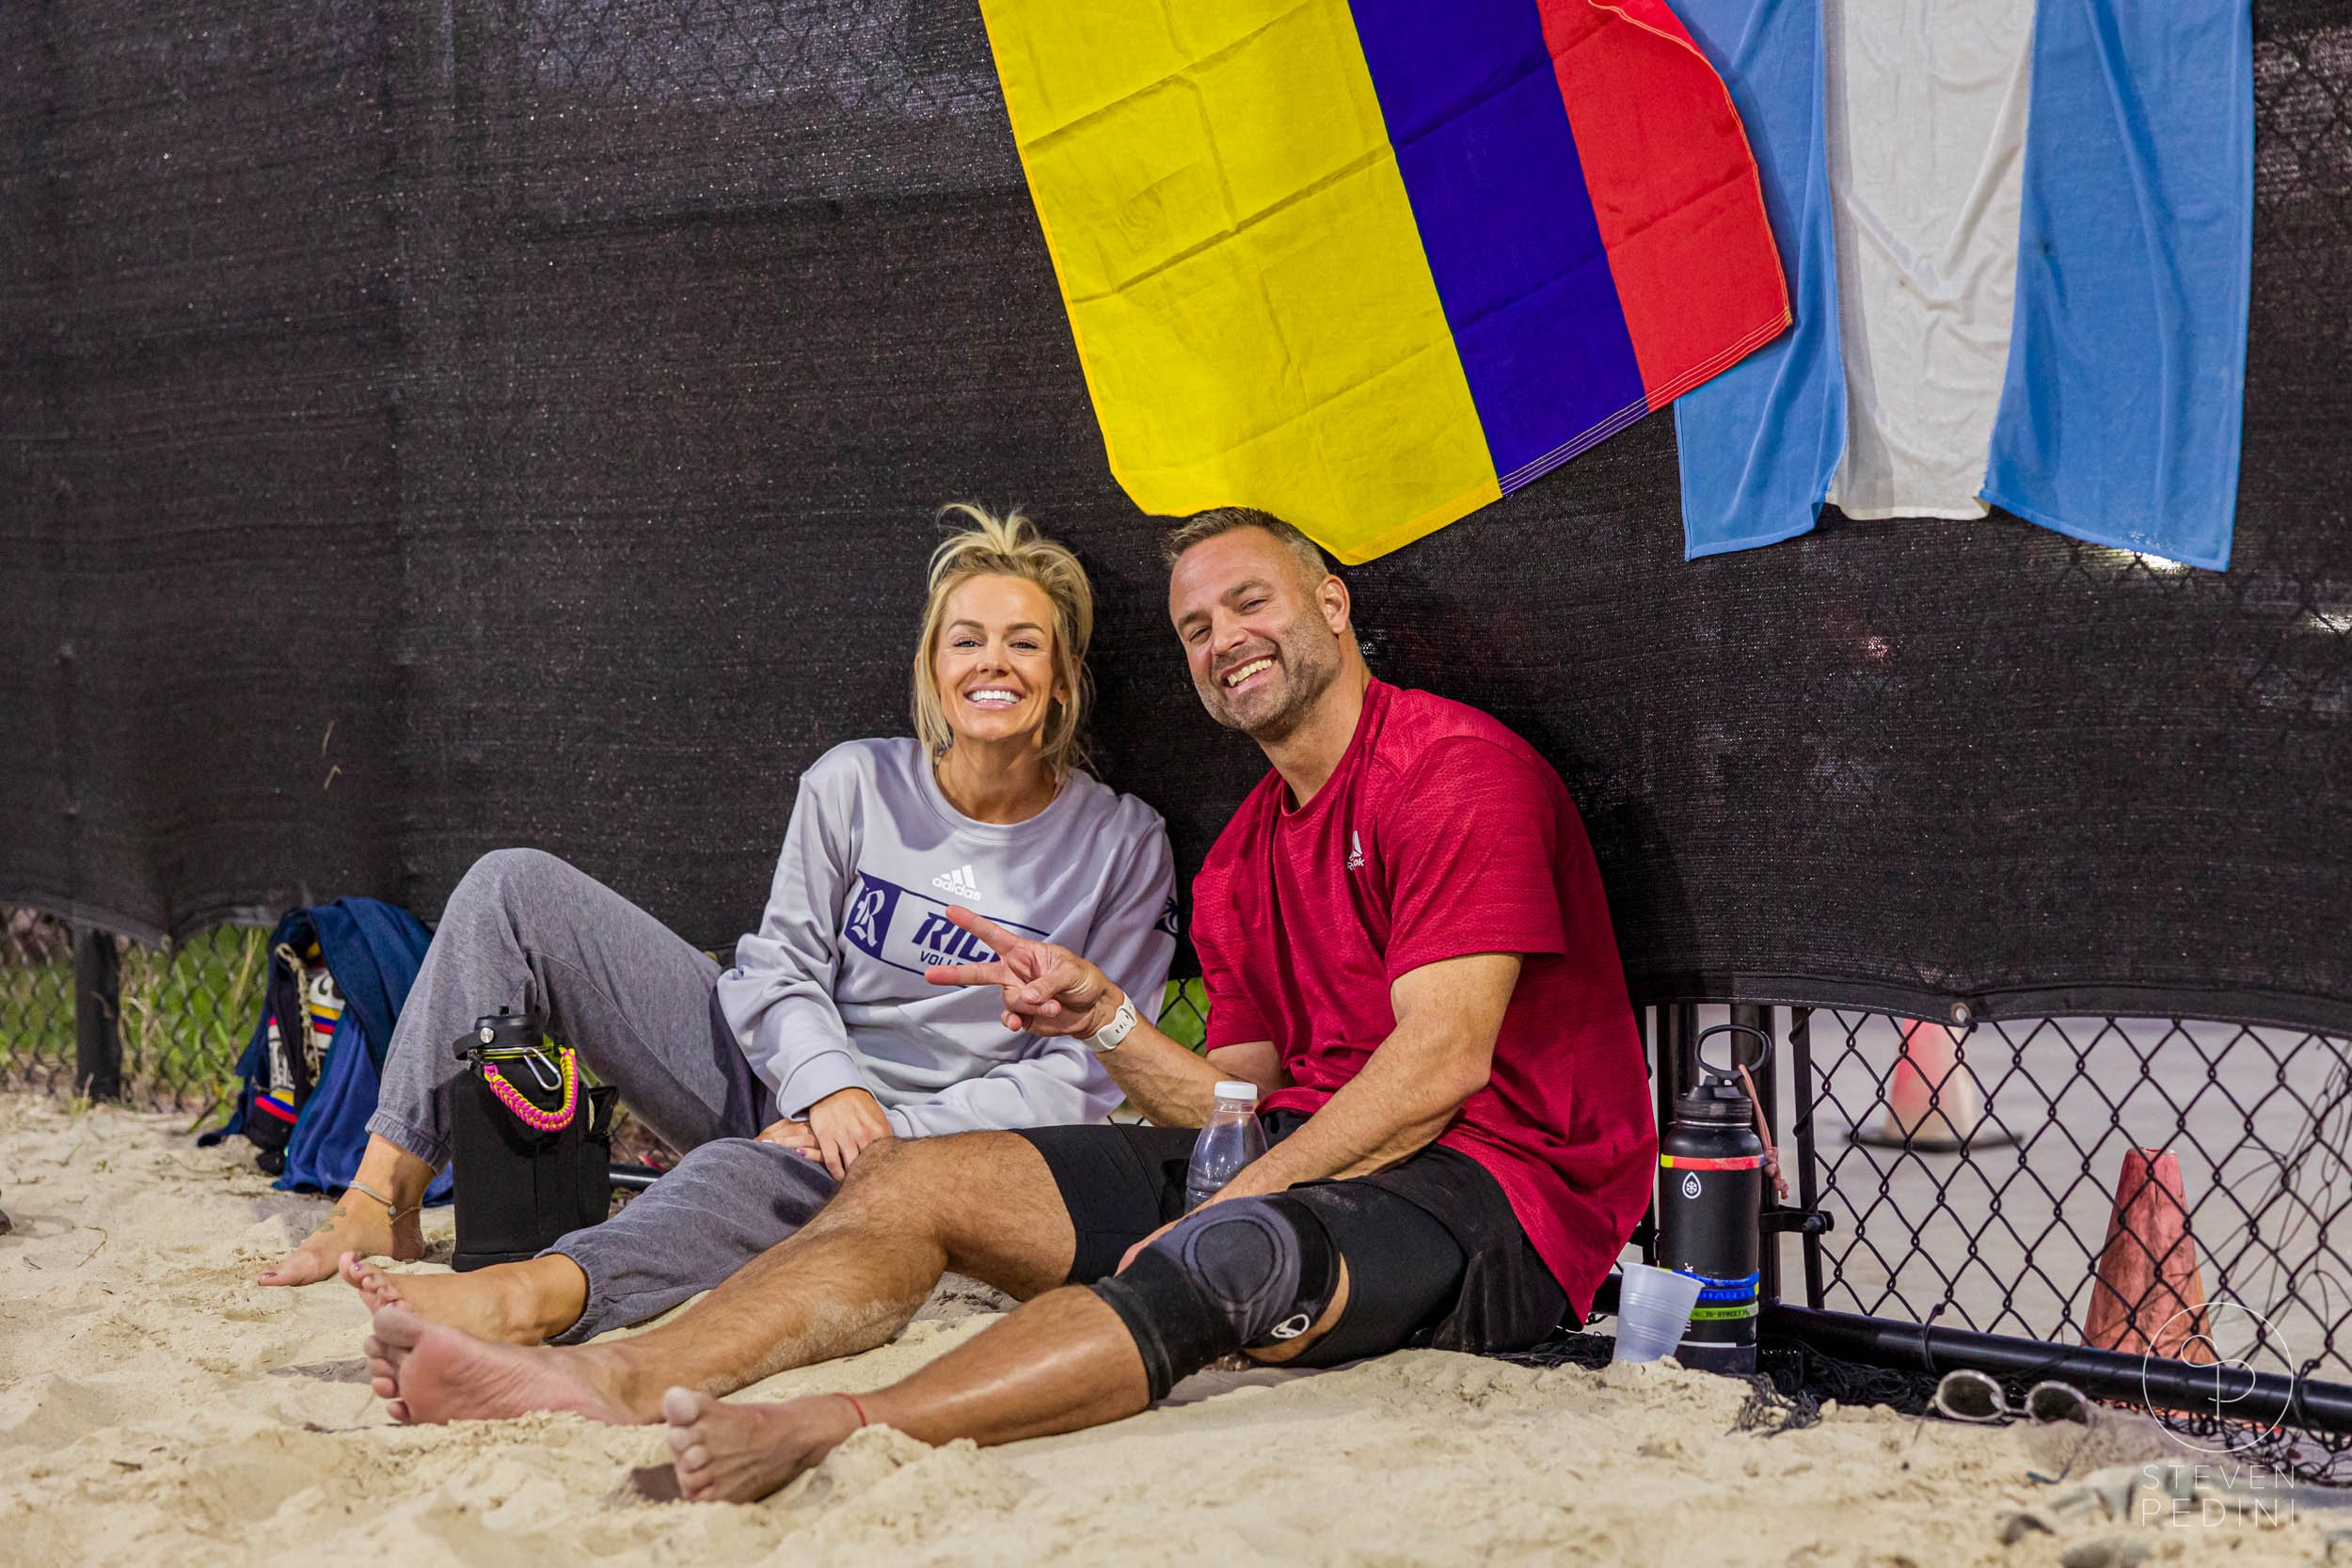 Steven Pedini Photography - Bumpy Pickle - Sand Volleyball - Houston TX - World Cup of Volleyball - 00299.jpg